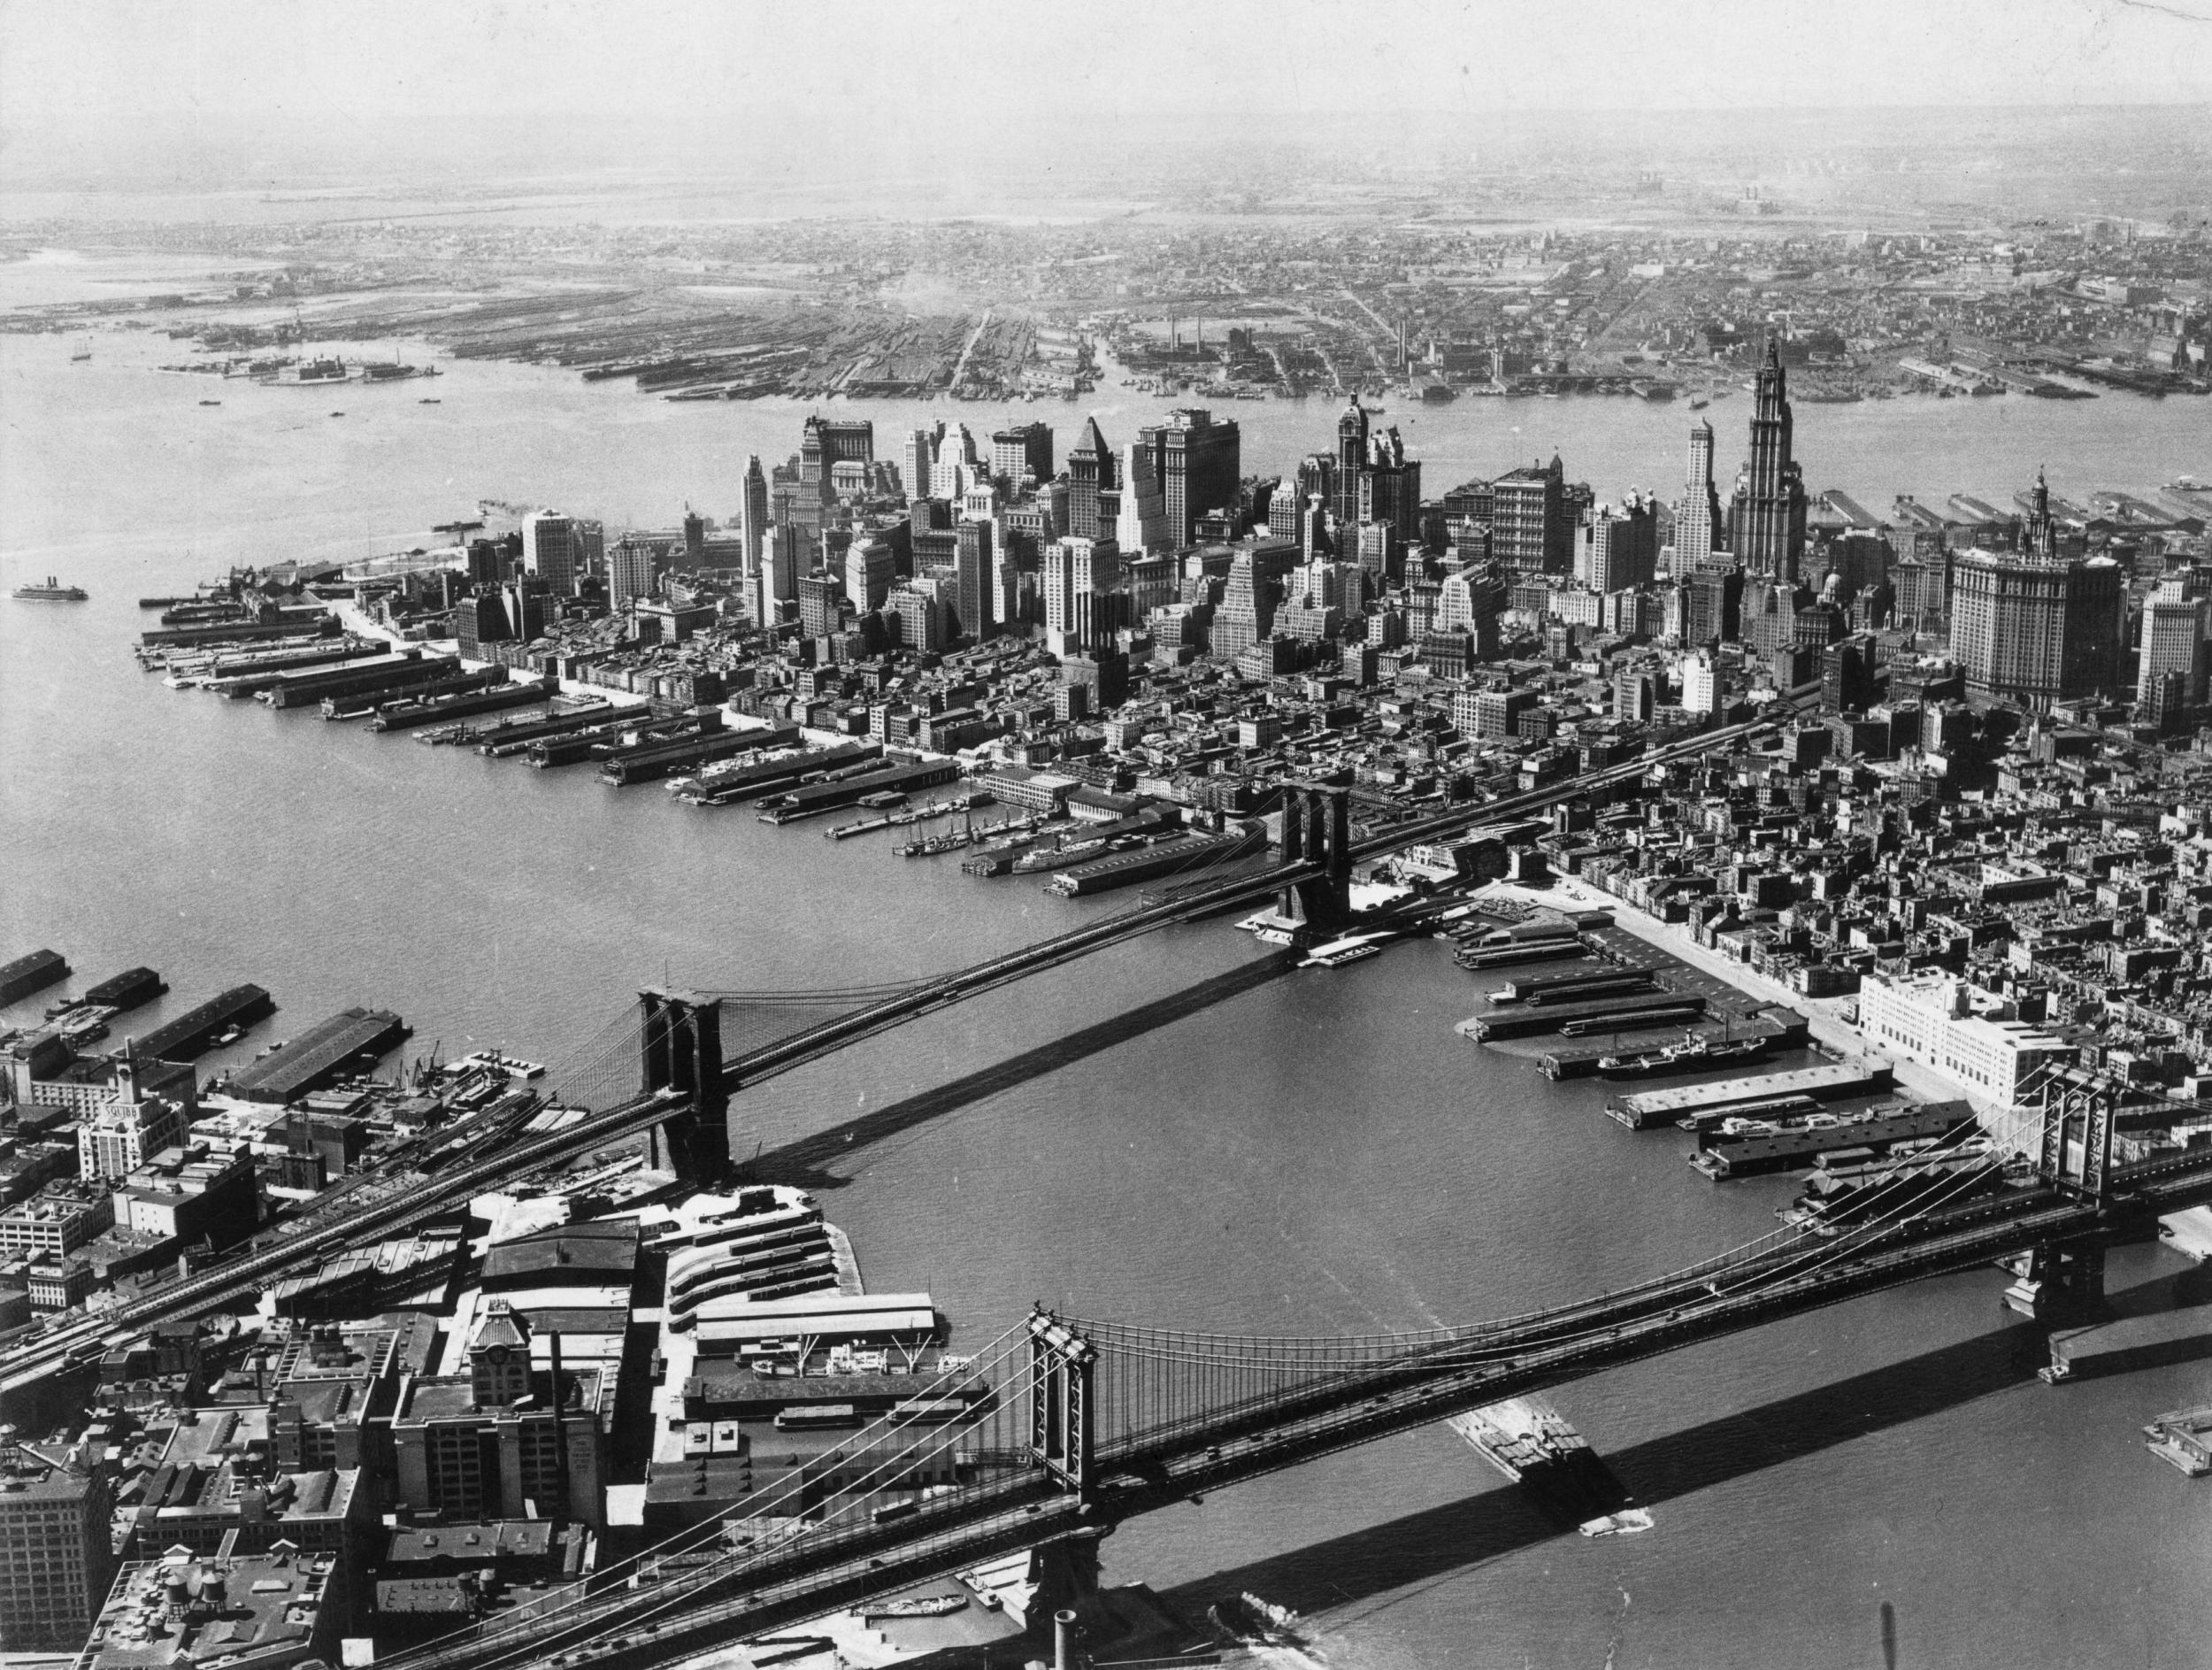 The Powerbroker – Urban Planning and the Battle for New York City